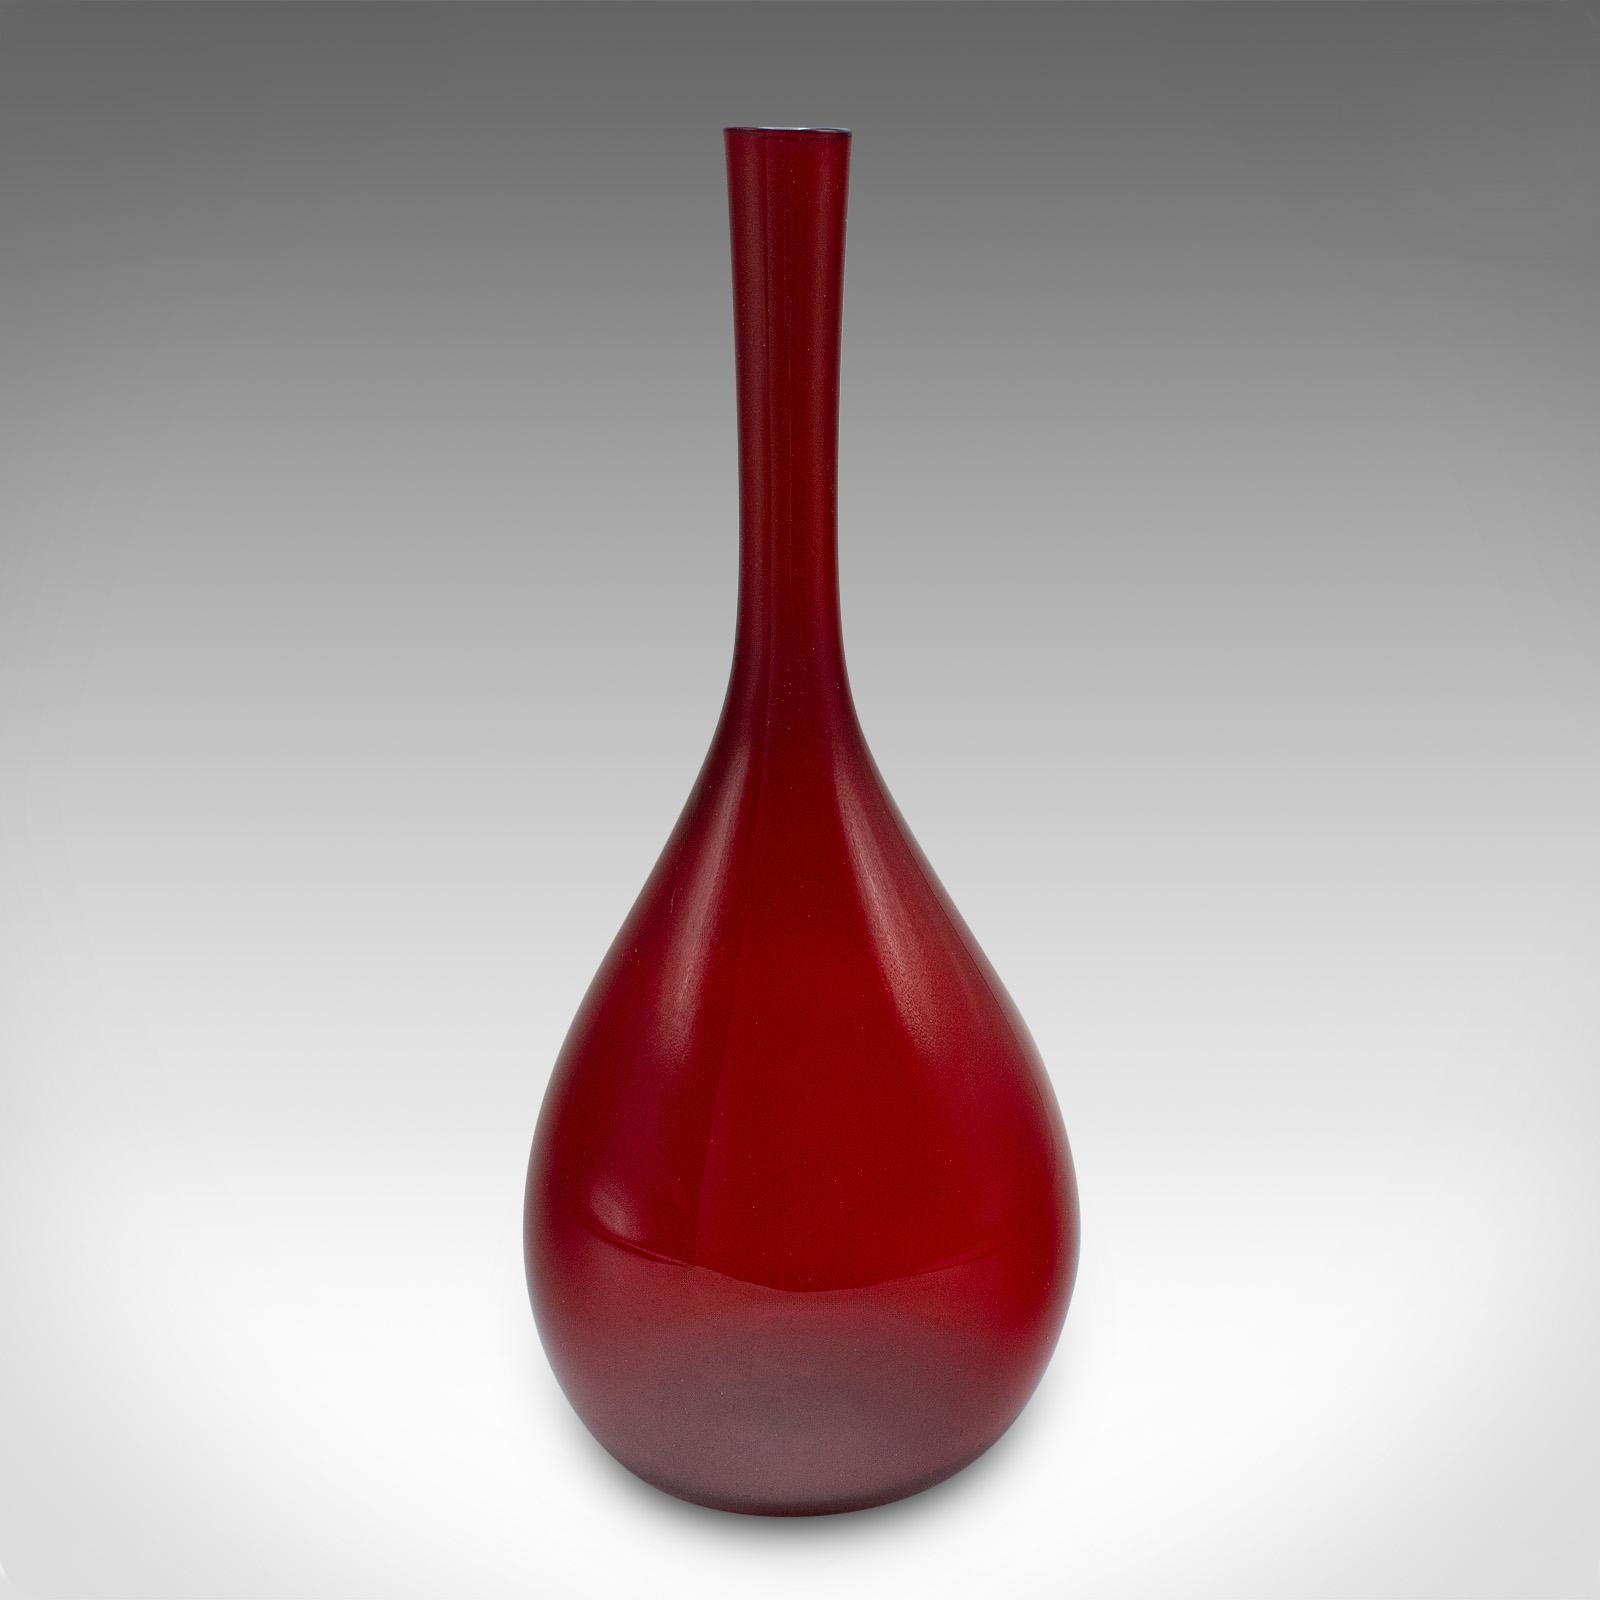 This is a vintage narrow stem vase. A Scandinavian, decorative glass posy sleeve with apothecary taste, dating to the mid 20th century, circa 1960.

Rich colour with an aesthetic redolent of laboratory glasses
Displays a desirable aged patina and in